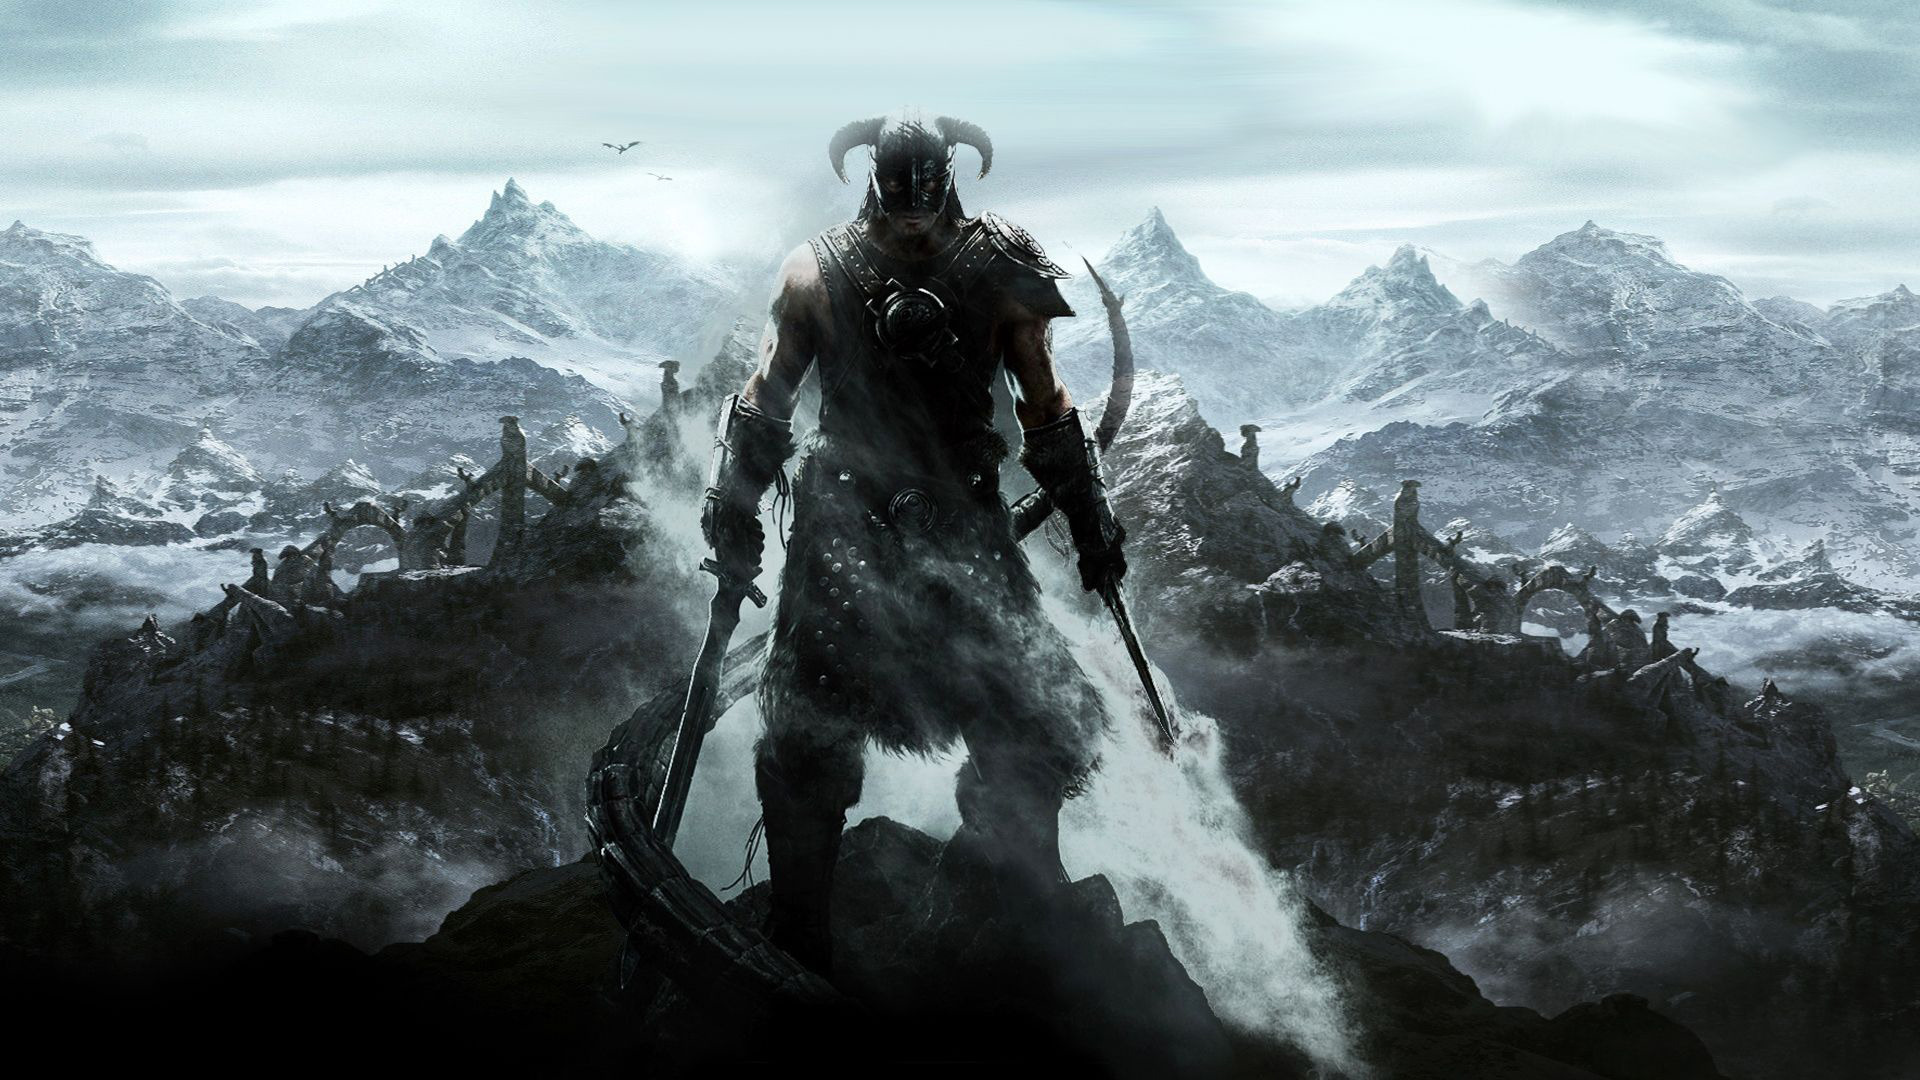 Skyrim Wallpaper HD free download | Wallpapers, Backgrounds ...